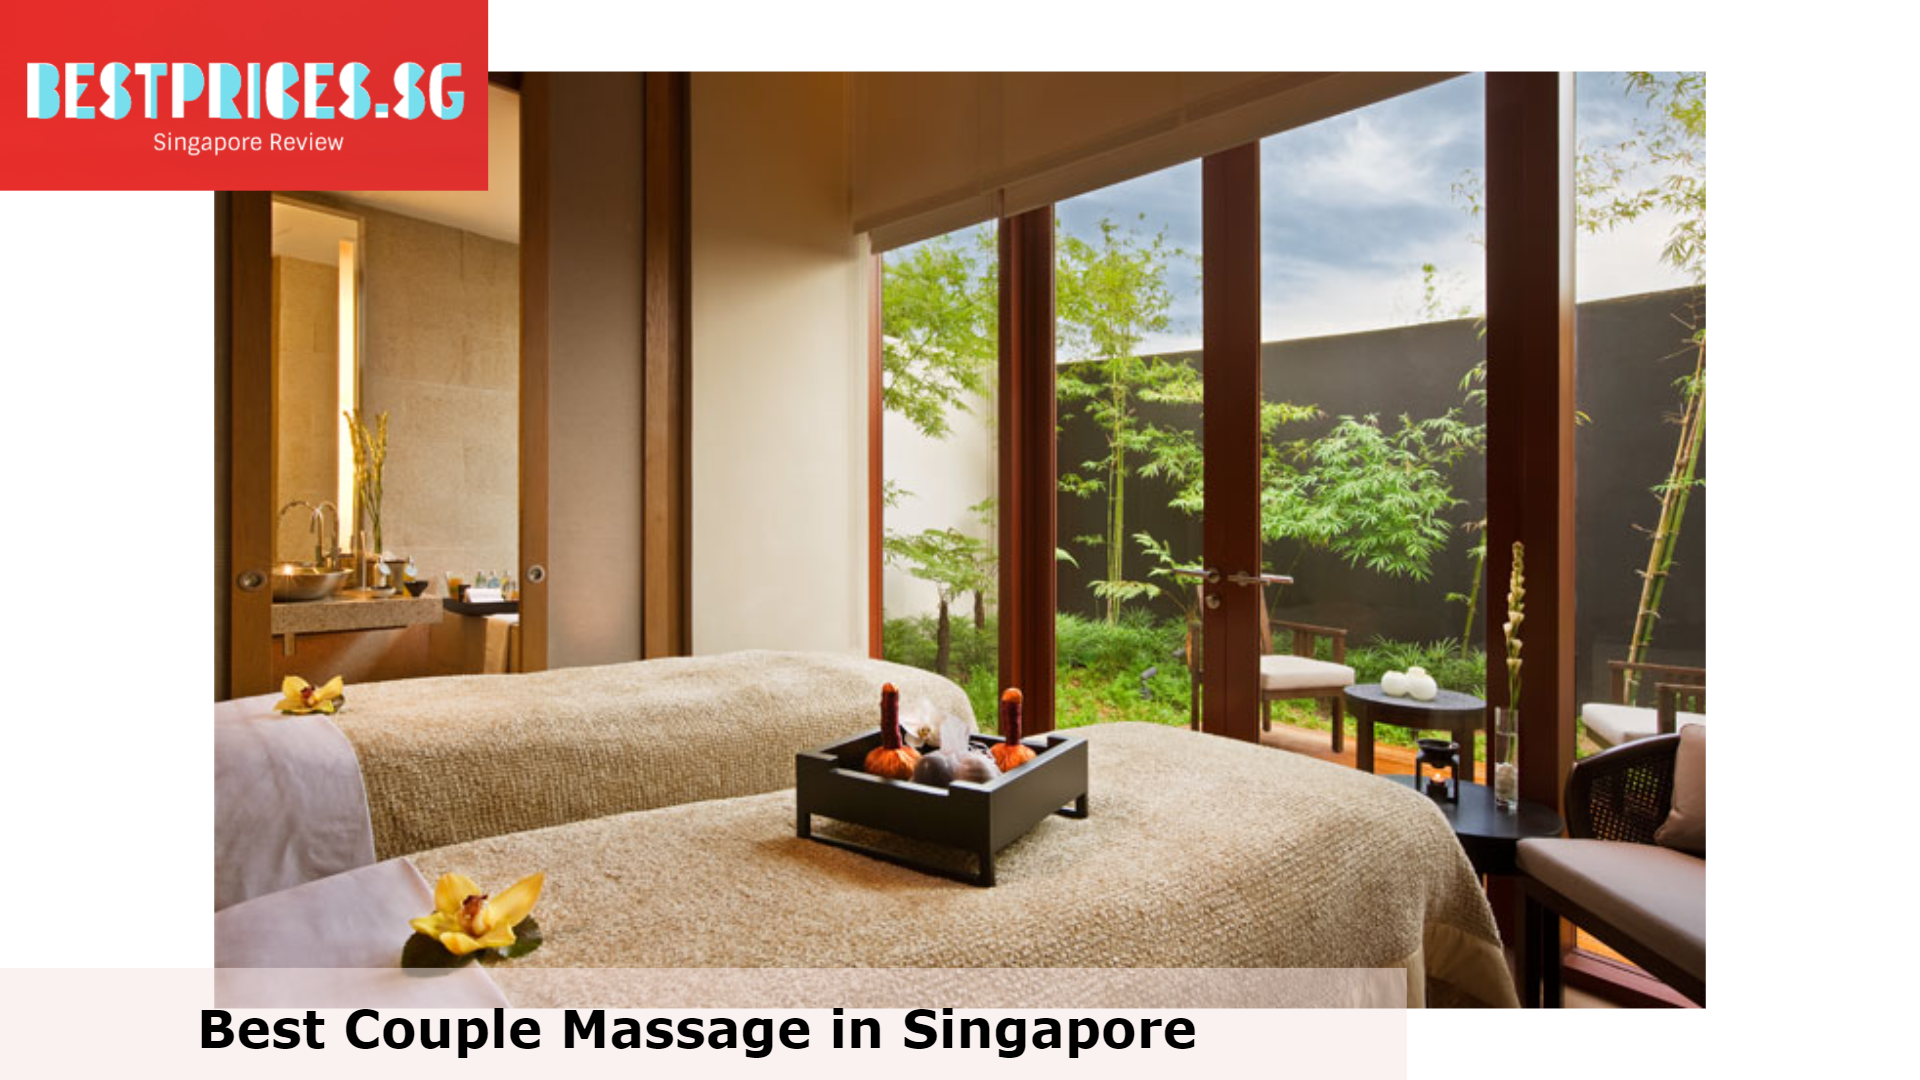 Auriga Spa - Best Couple Massage in Singapore, Couple Massage Singapore, Affordable Couple Massage & Spa Deals In Singapore, best couple spa packages Singapore, Couple Spa Treatments Singapore, Is it weird to get a couples massage?, What type of massage is best for couples?, What does Couple massage mean?, What is the difference between a couples massage and a regular massage?, couple massage places, affordable couple massage singapore, couple massage singapore 2022, couple spa singapore promotions 2022, best couple massage singapore, birthday spa packages singapore, , affordable couple spa packages, couple massage spa, couple jacuzzi spa retreat, 